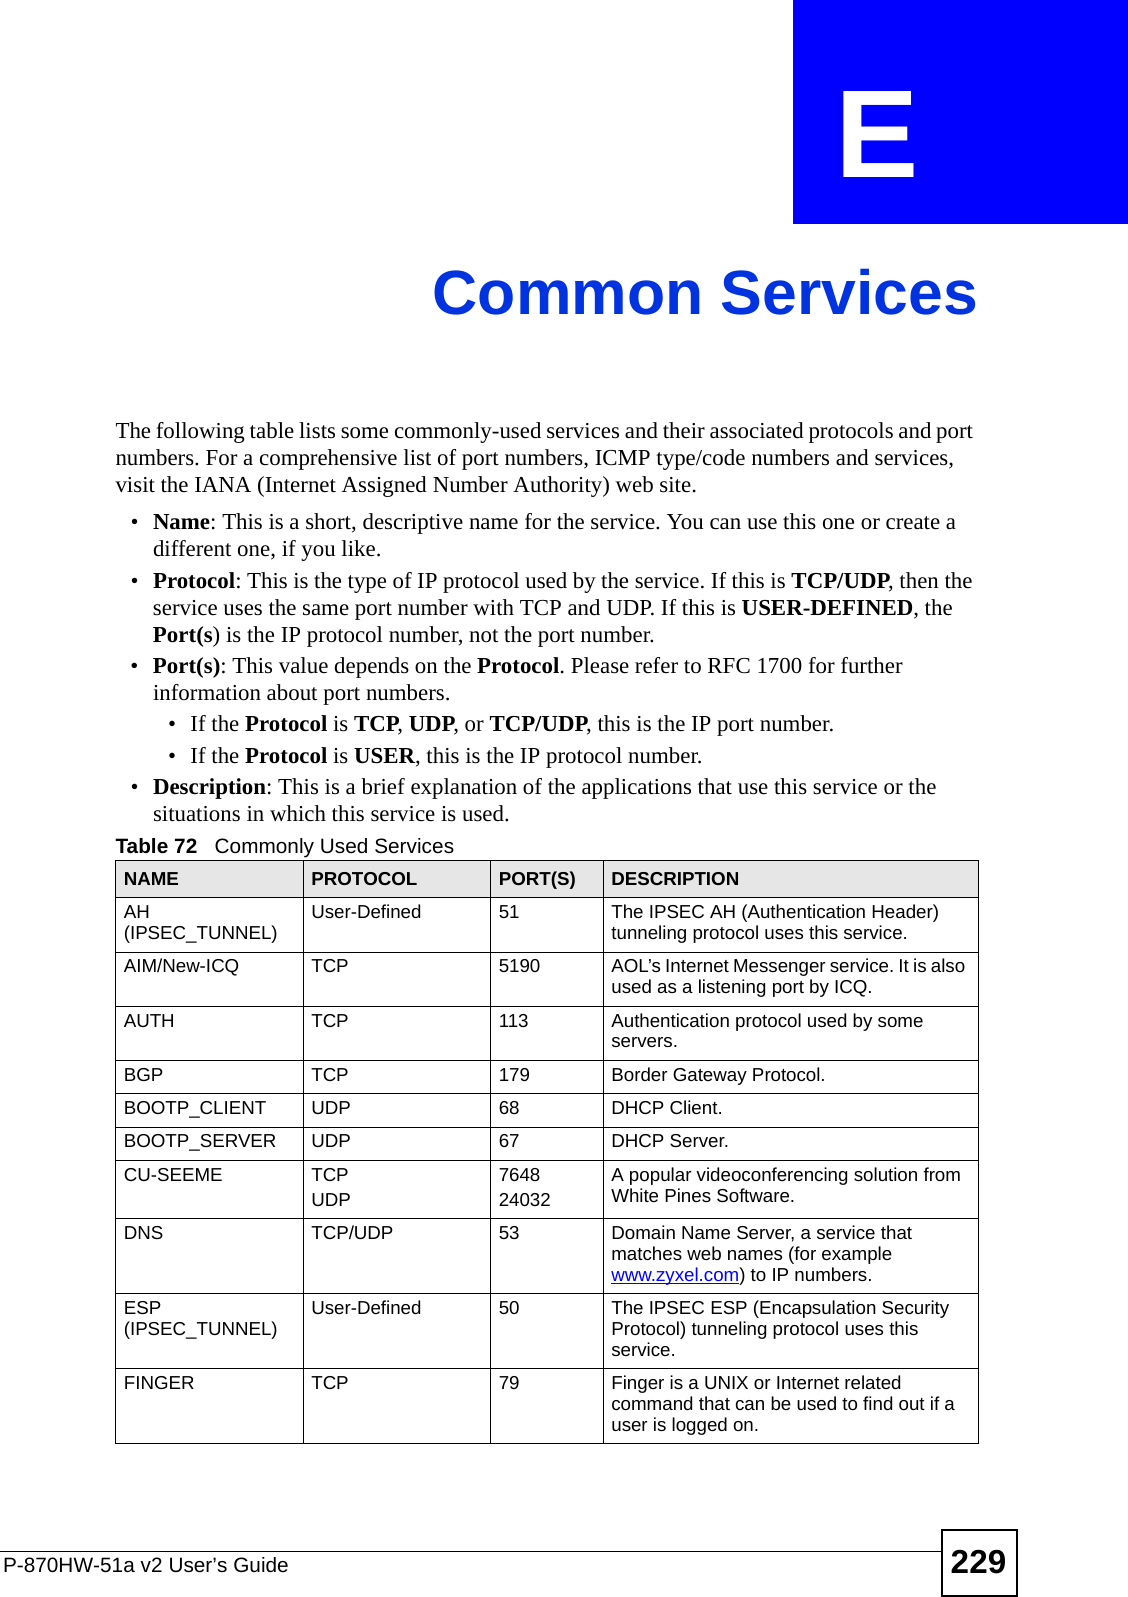 P-870HW-51a v2 User’s Guide 229APPENDIX  E Common ServicesThe following table lists some commonly-used services and their associated protocols and port numbers. For a comprehensive list of port numbers, ICMP type/code numbers and services, visit the IANA (Internet Assigned Number Authority) web site. •Name: This is a short, descriptive name for the service. You can use this one or create a different one, if you like.•Protocol: This is the type of IP protocol used by the service. If this is TCP/UDP, then the service uses the same port number with TCP and UDP. If this is USER-DEFINED, the Port(s) is the IP protocol number, not the port number.•Port(s): This value depends on the Protocol. Please refer to RFC 1700 for further information about port numbers.• If the Protocol is TCP, UDP, or TCP/UDP, this is the IP port number.• If the Protocol is USER, this is the IP protocol number.•Description: This is a brief explanation of the applications that use this service or the situations in which this service is used.Table 72   Commonly Used ServicesNAME PROTOCOL PORT(S) DESCRIPTIONAH (IPSEC_TUNNEL) User-Defined 51 The IPSEC AH (Authentication Header) tunneling protocol uses this service.AIM/New-ICQ TCP 5190 AOL’s Internet Messenger service. It is also used as a listening port by ICQ.AUTH TCP 113 Authentication protocol used by some servers.BGP TCP 179 Border Gateway Protocol.BOOTP_CLIENT UDP 68 DHCP Client.BOOTP_SERVER UDP 67 DHCP Server.CU-SEEME TCPUDP764824032A popular videoconferencing solution from White Pines Software.DNS TCP/UDP 53 Domain Name Server, a service that matches web names (for example www.zyxel.com) to IP numbers.ESP (IPSEC_TUNNEL) User-Defined 50 The IPSEC ESP (Encapsulation Security Protocol) tunneling protocol uses this service.FINGER TCP 79 Finger is a UNIX or Internet related command that can be used to find out if a user is logged on.